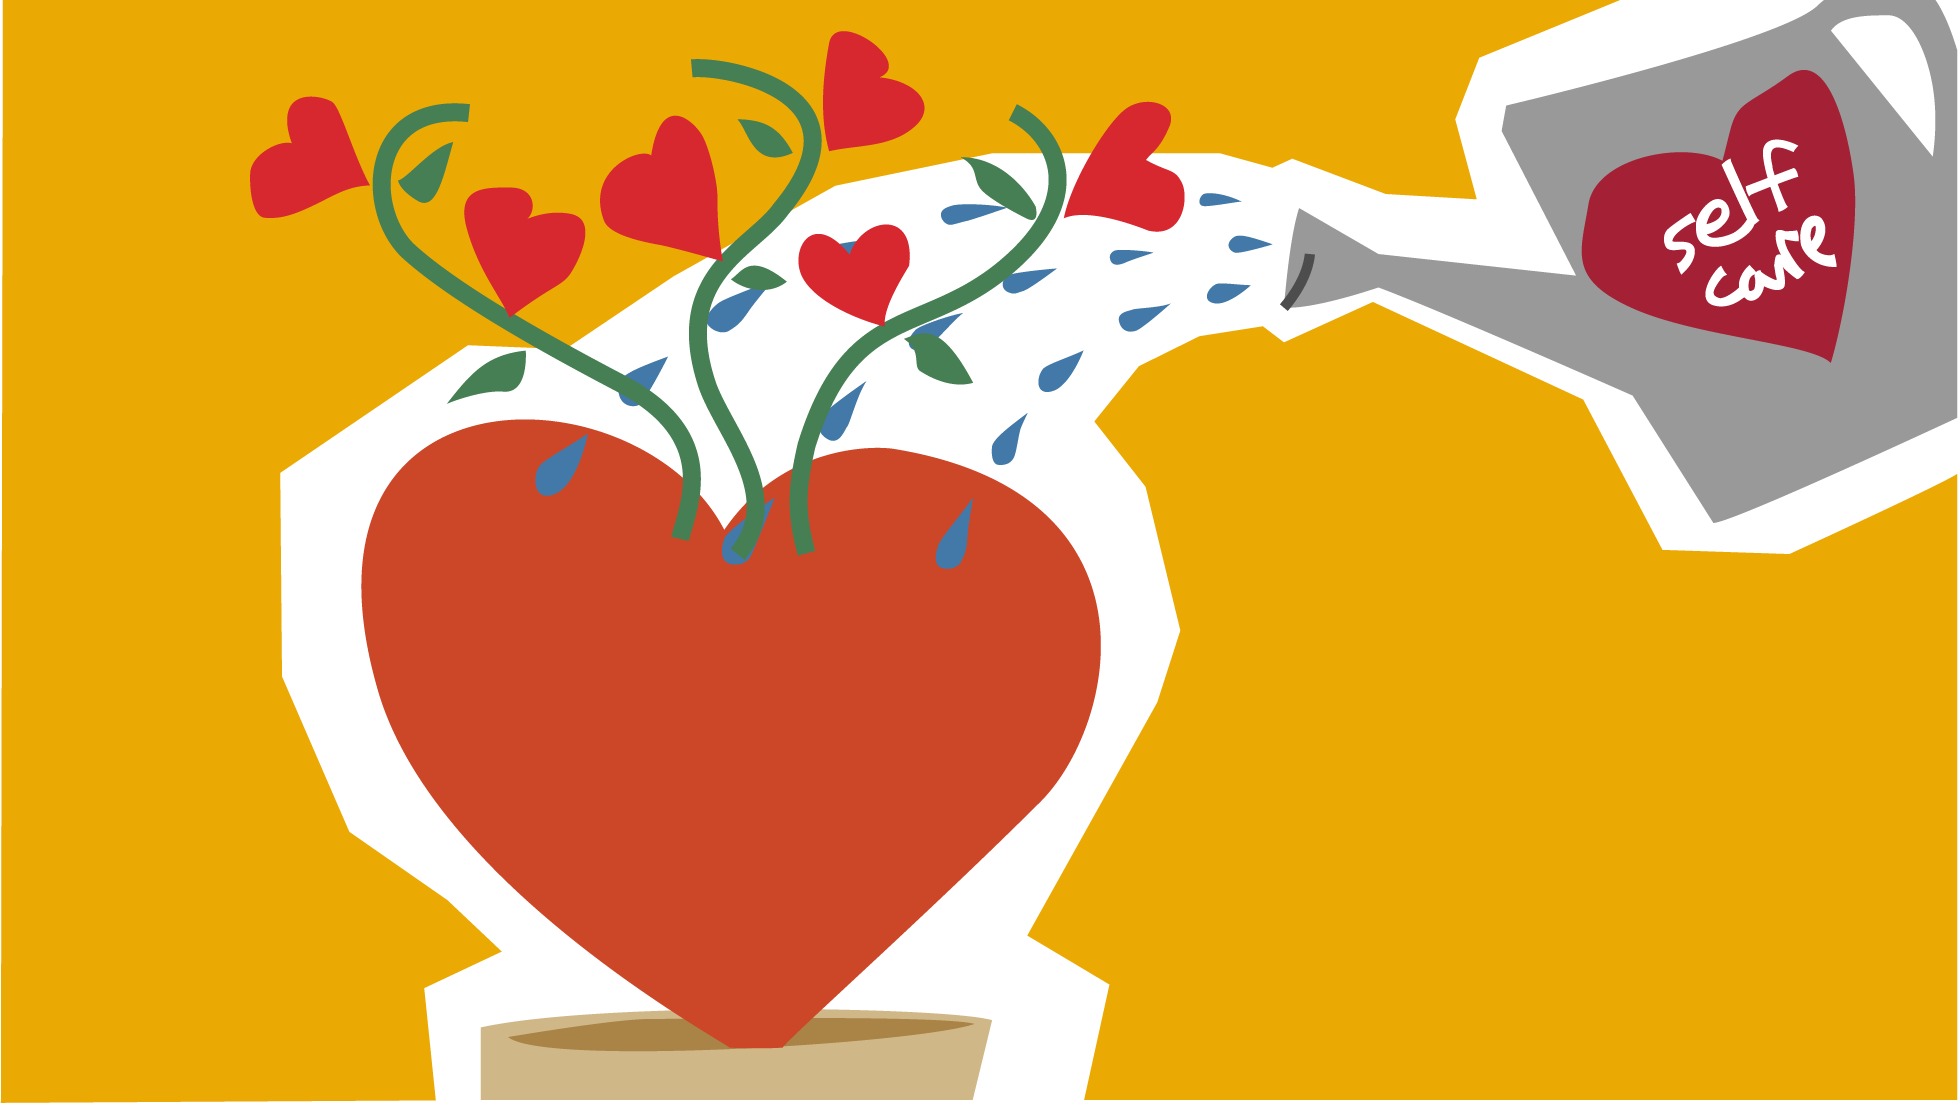 An illustration of a self-care watering can pouring onto a growing heart. 